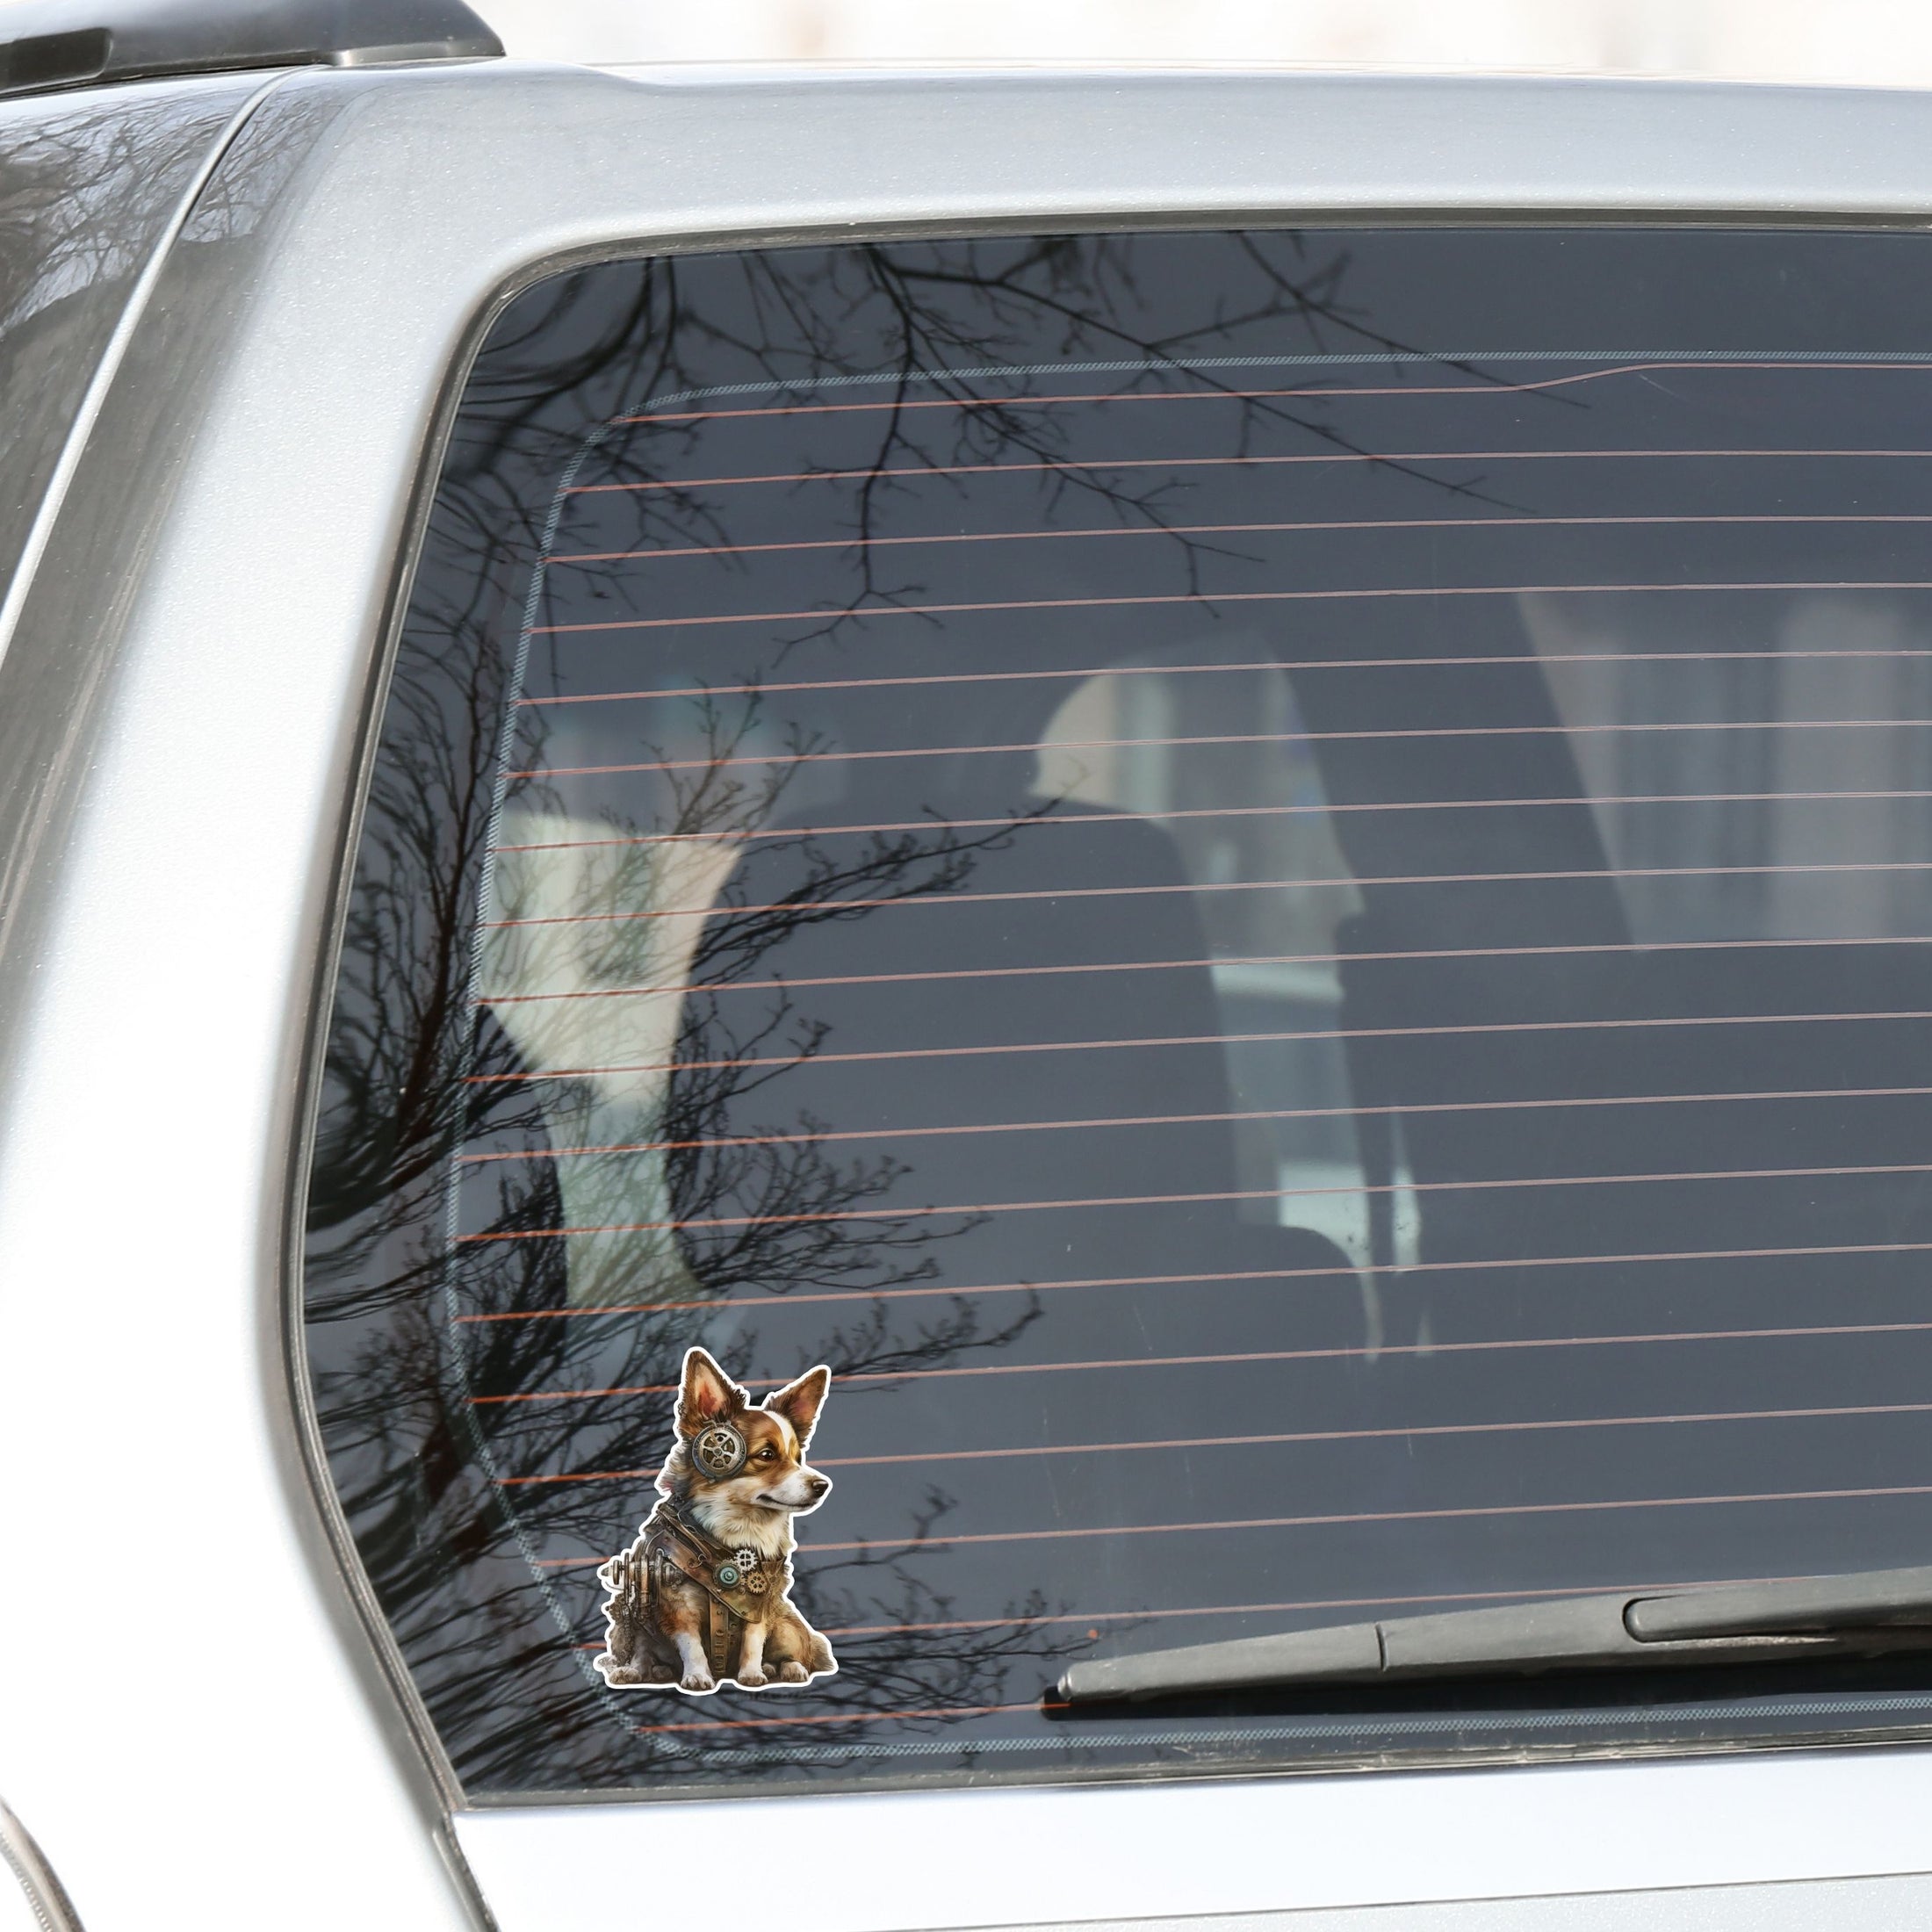 This image shows the steampunk puppy sticker on the back window of a car.